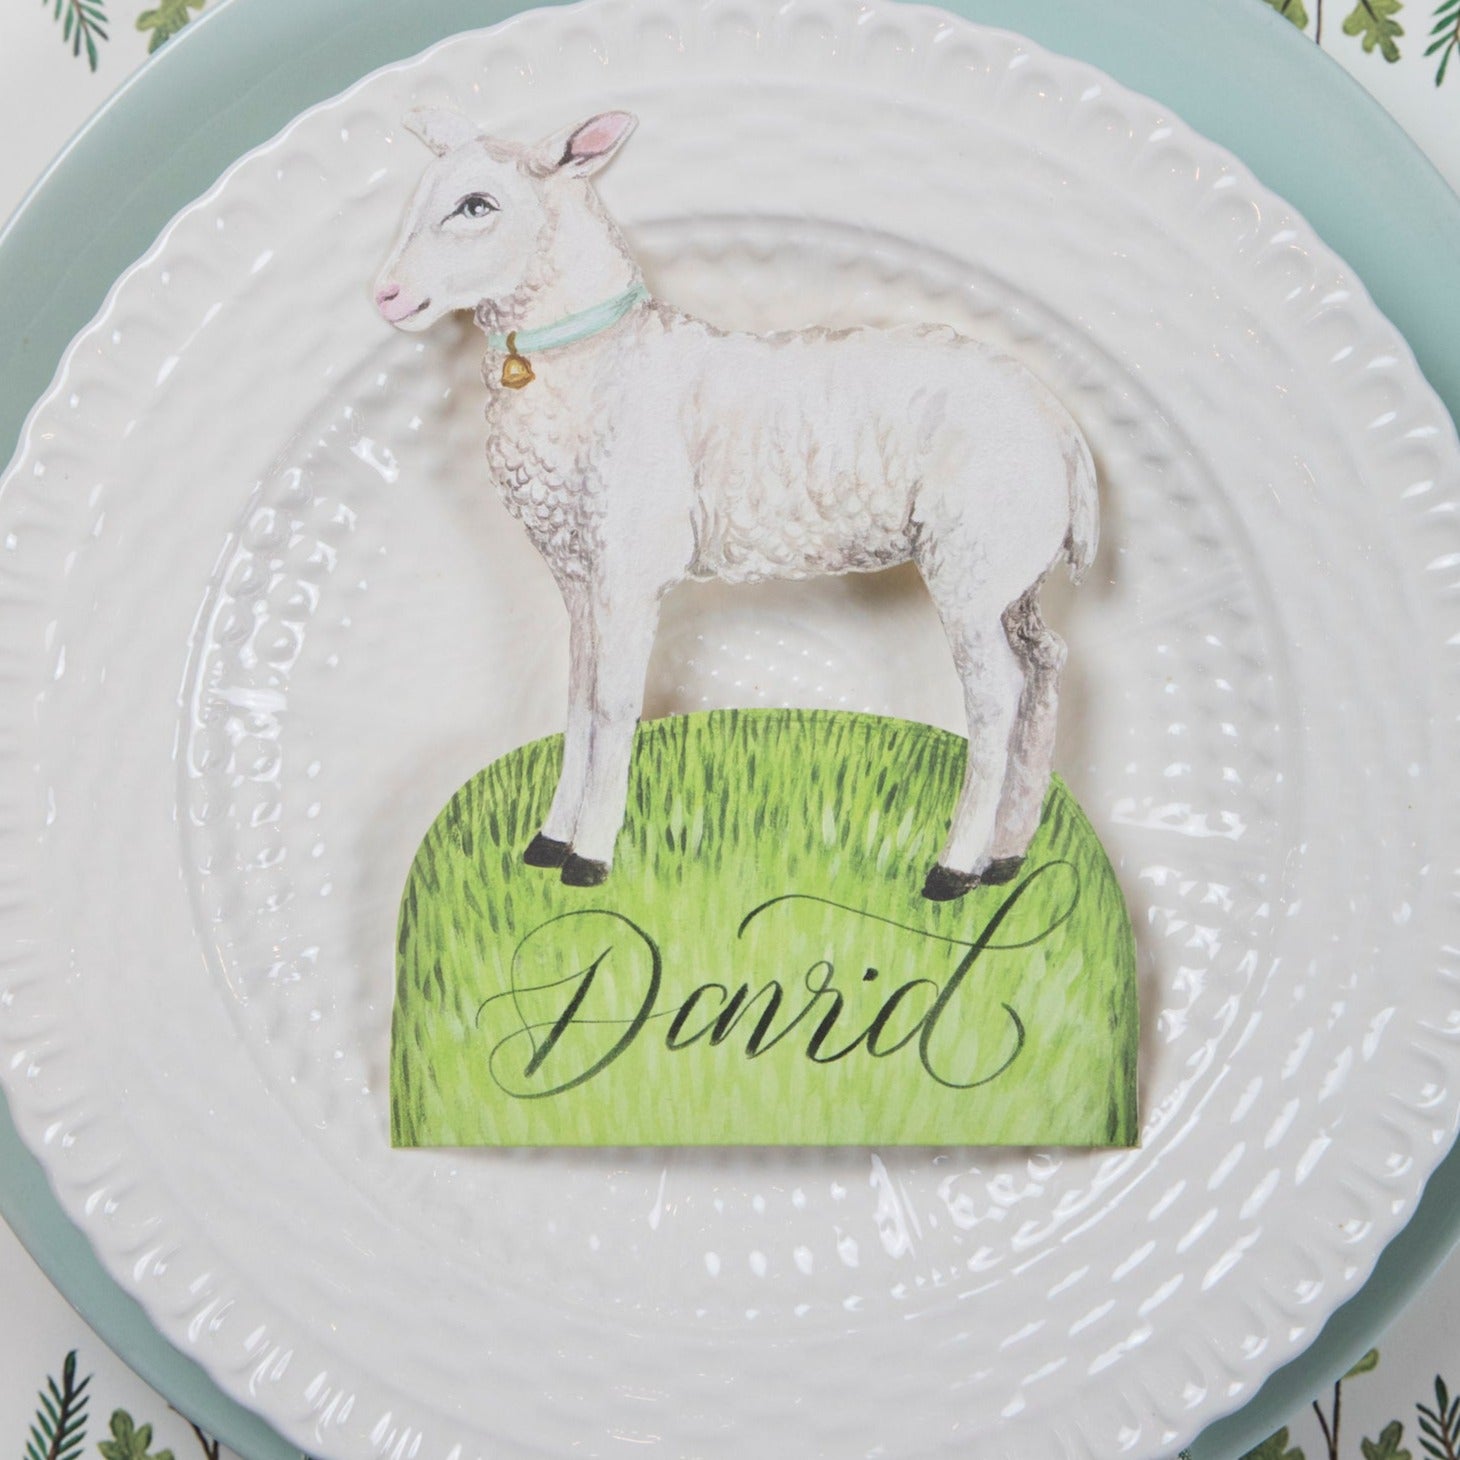 A plate with a Little Lamb place card on it, inspired by the Easter Garden Story, designed by Hester &amp; Cook.